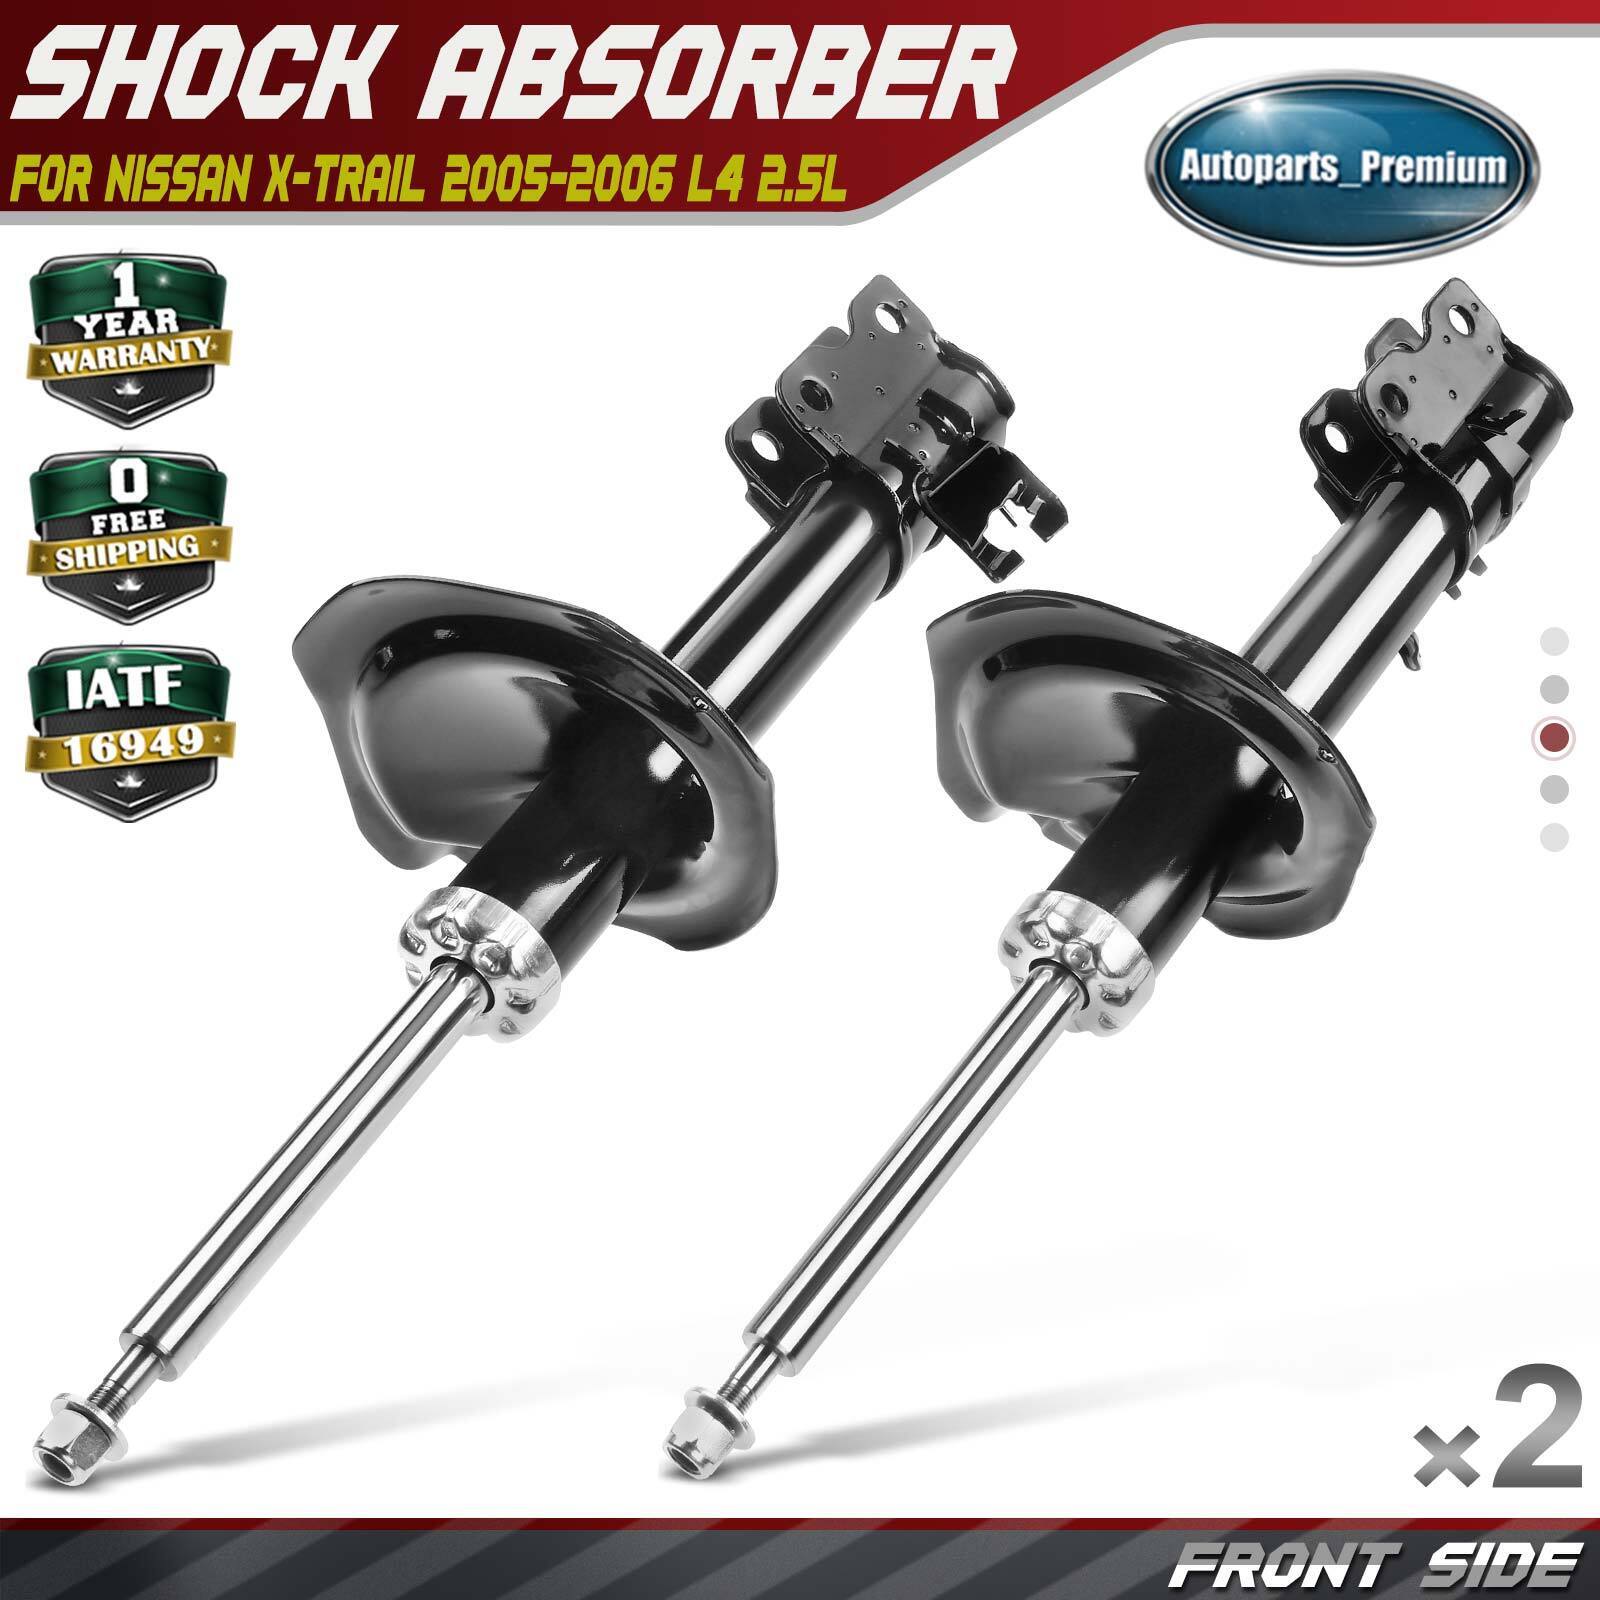 New Pair(2) Front Left & Right Shock Absorber Strut for Nissan X-Trail 2005-2006